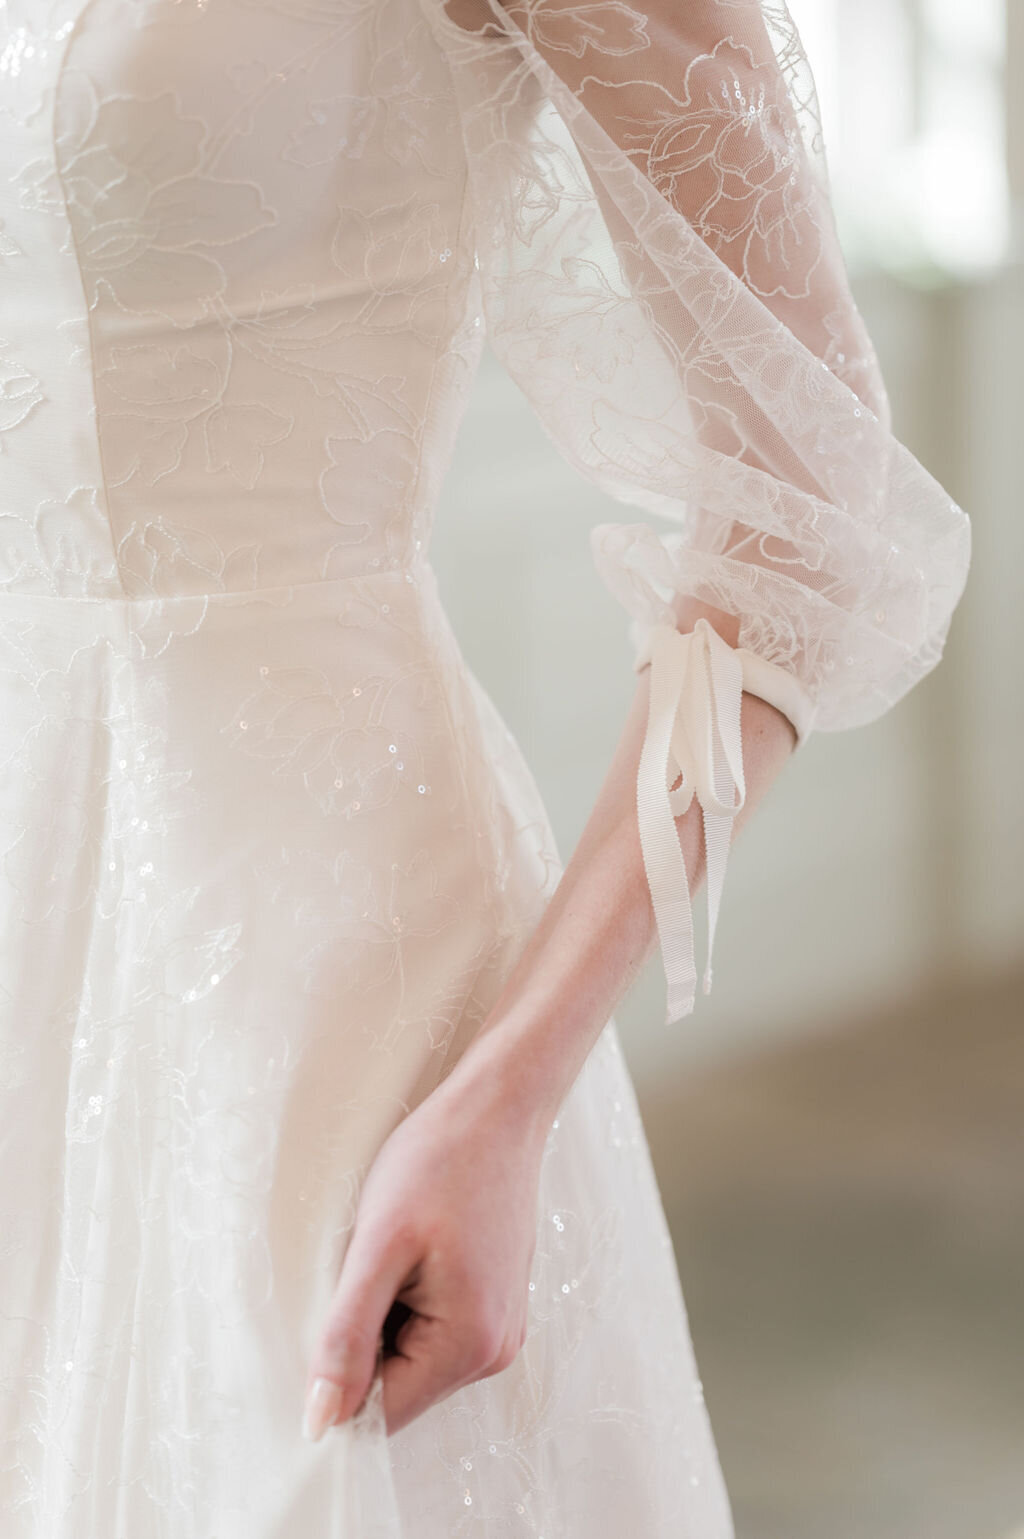 Close-up of the sparkly floral lace fabric and sleeve bow details on the Gene wedding dress style.